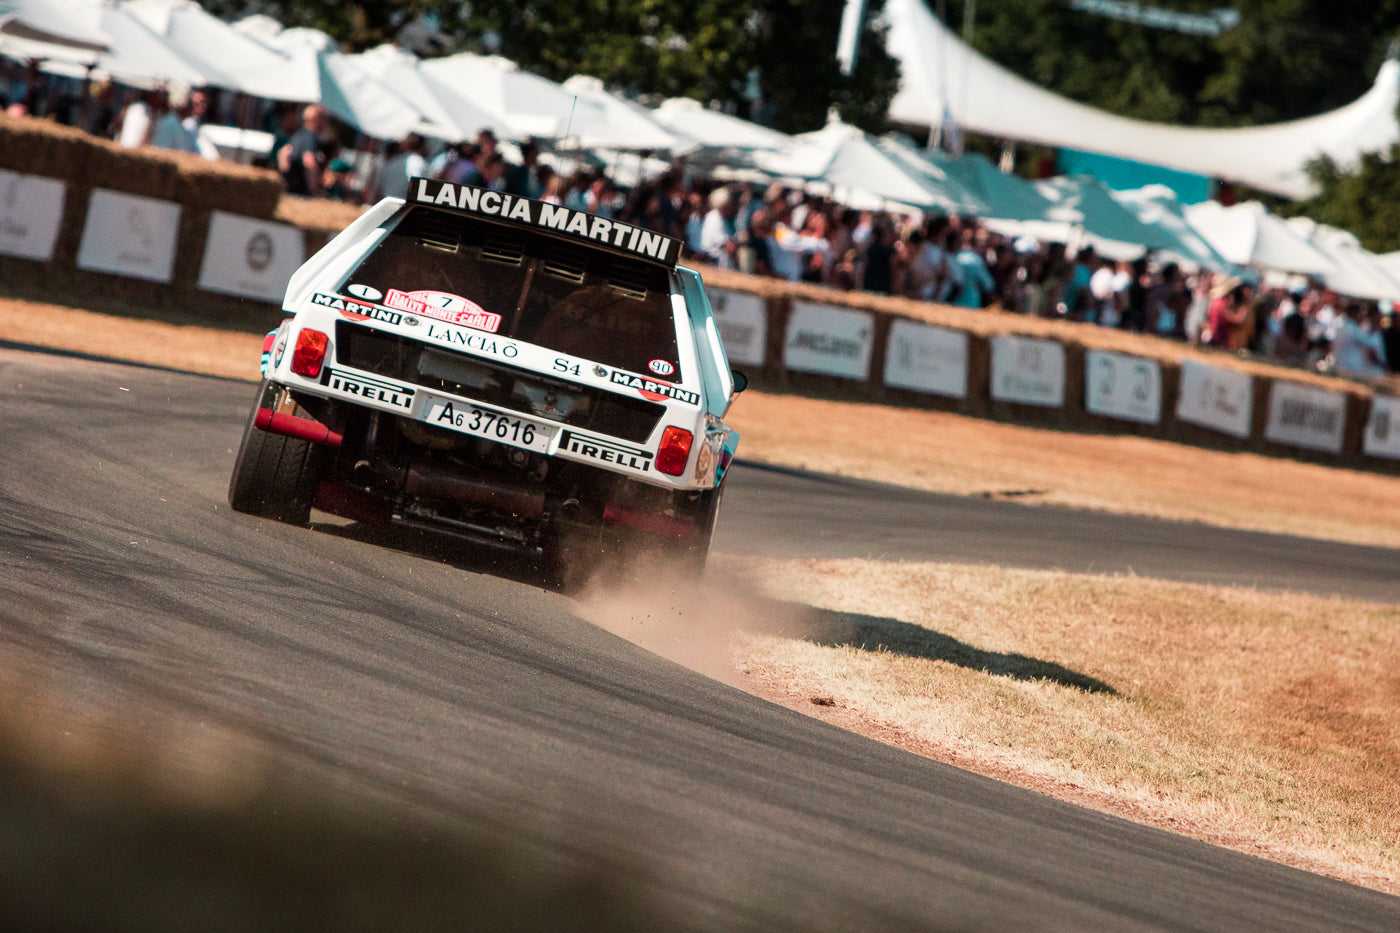 Martini Lancia Delta S4 world famous group B rallye car cornering at the speed track of Goodwood Festival of Speed. (Photo: Alex Lawrence – The White Wall 2018)